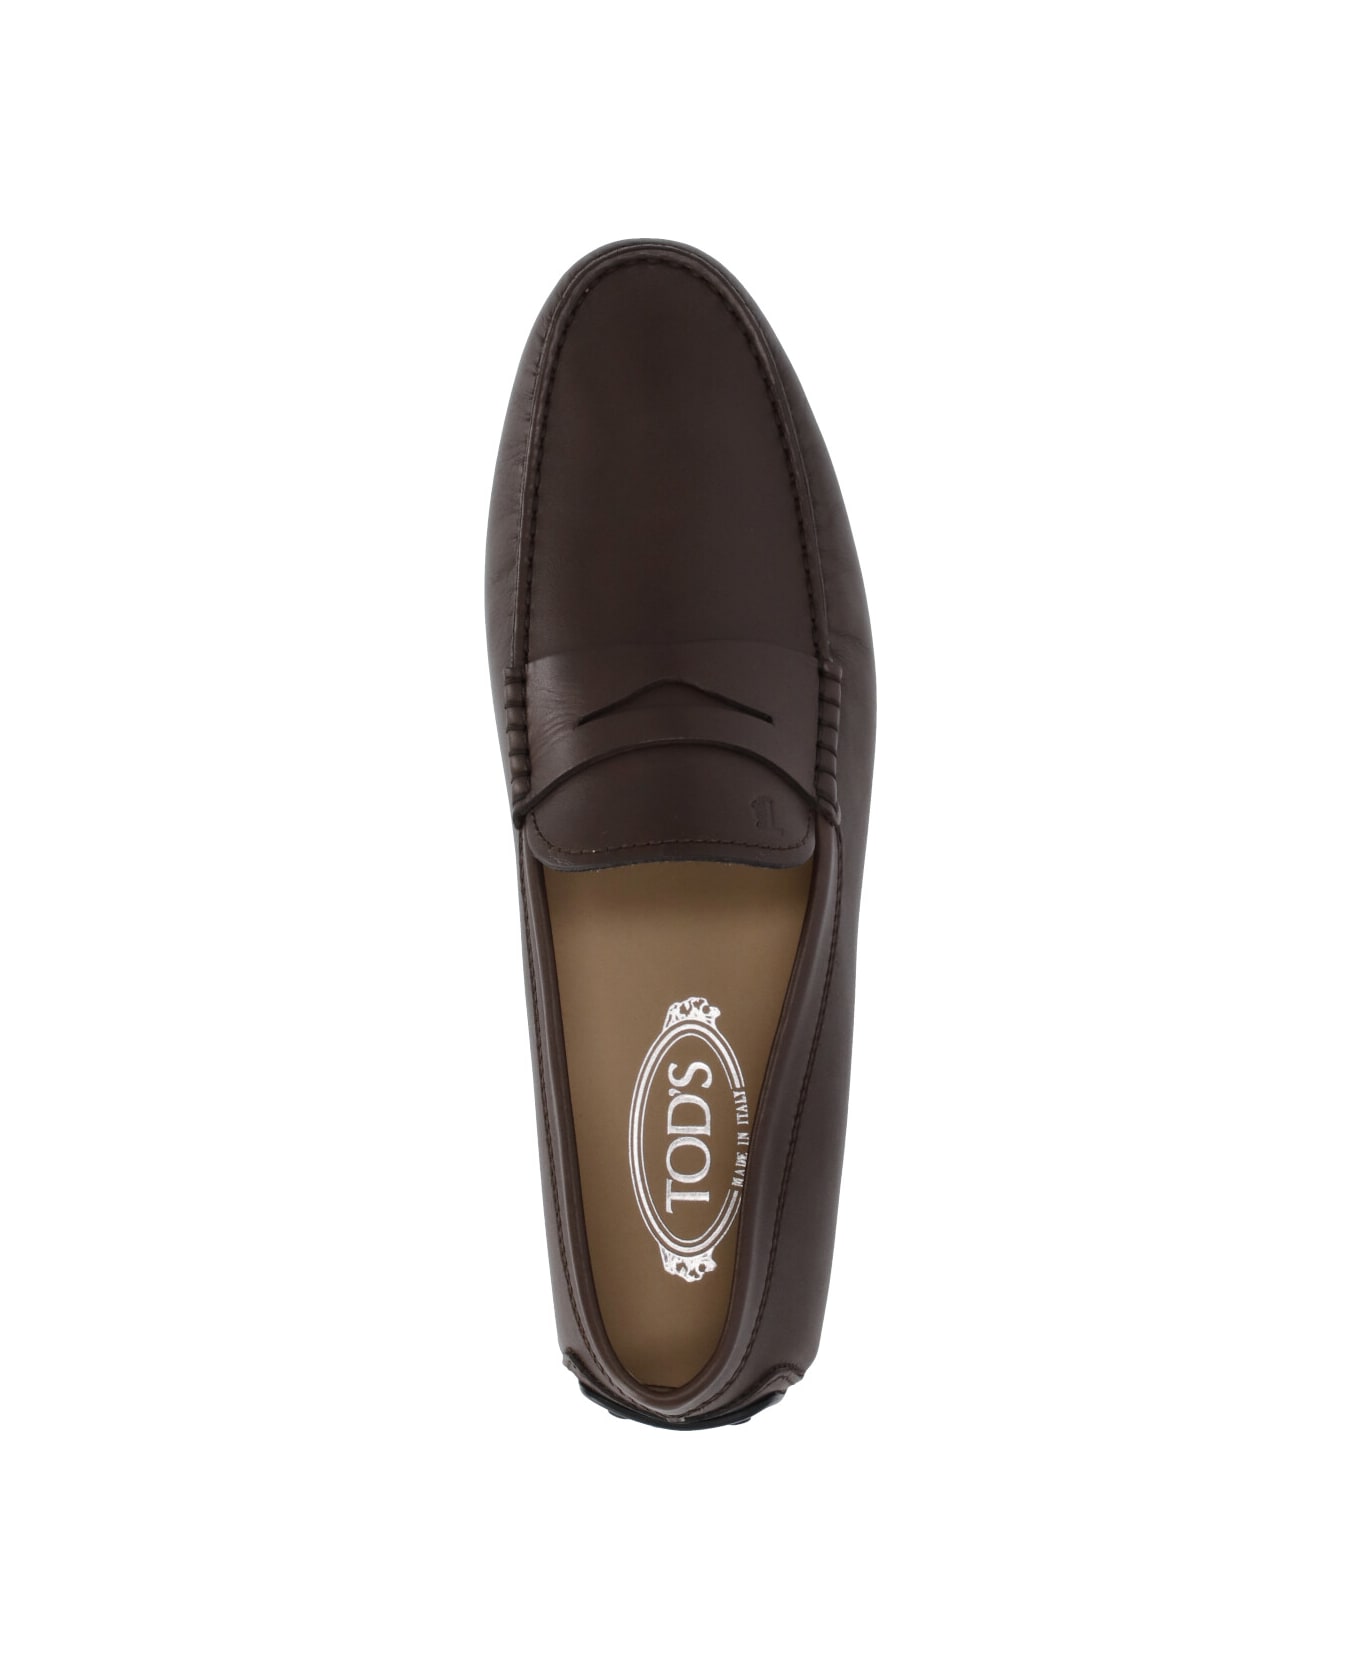 Tod's Logo Engraved Loafers - Brown ローファー＆デッキシューズ